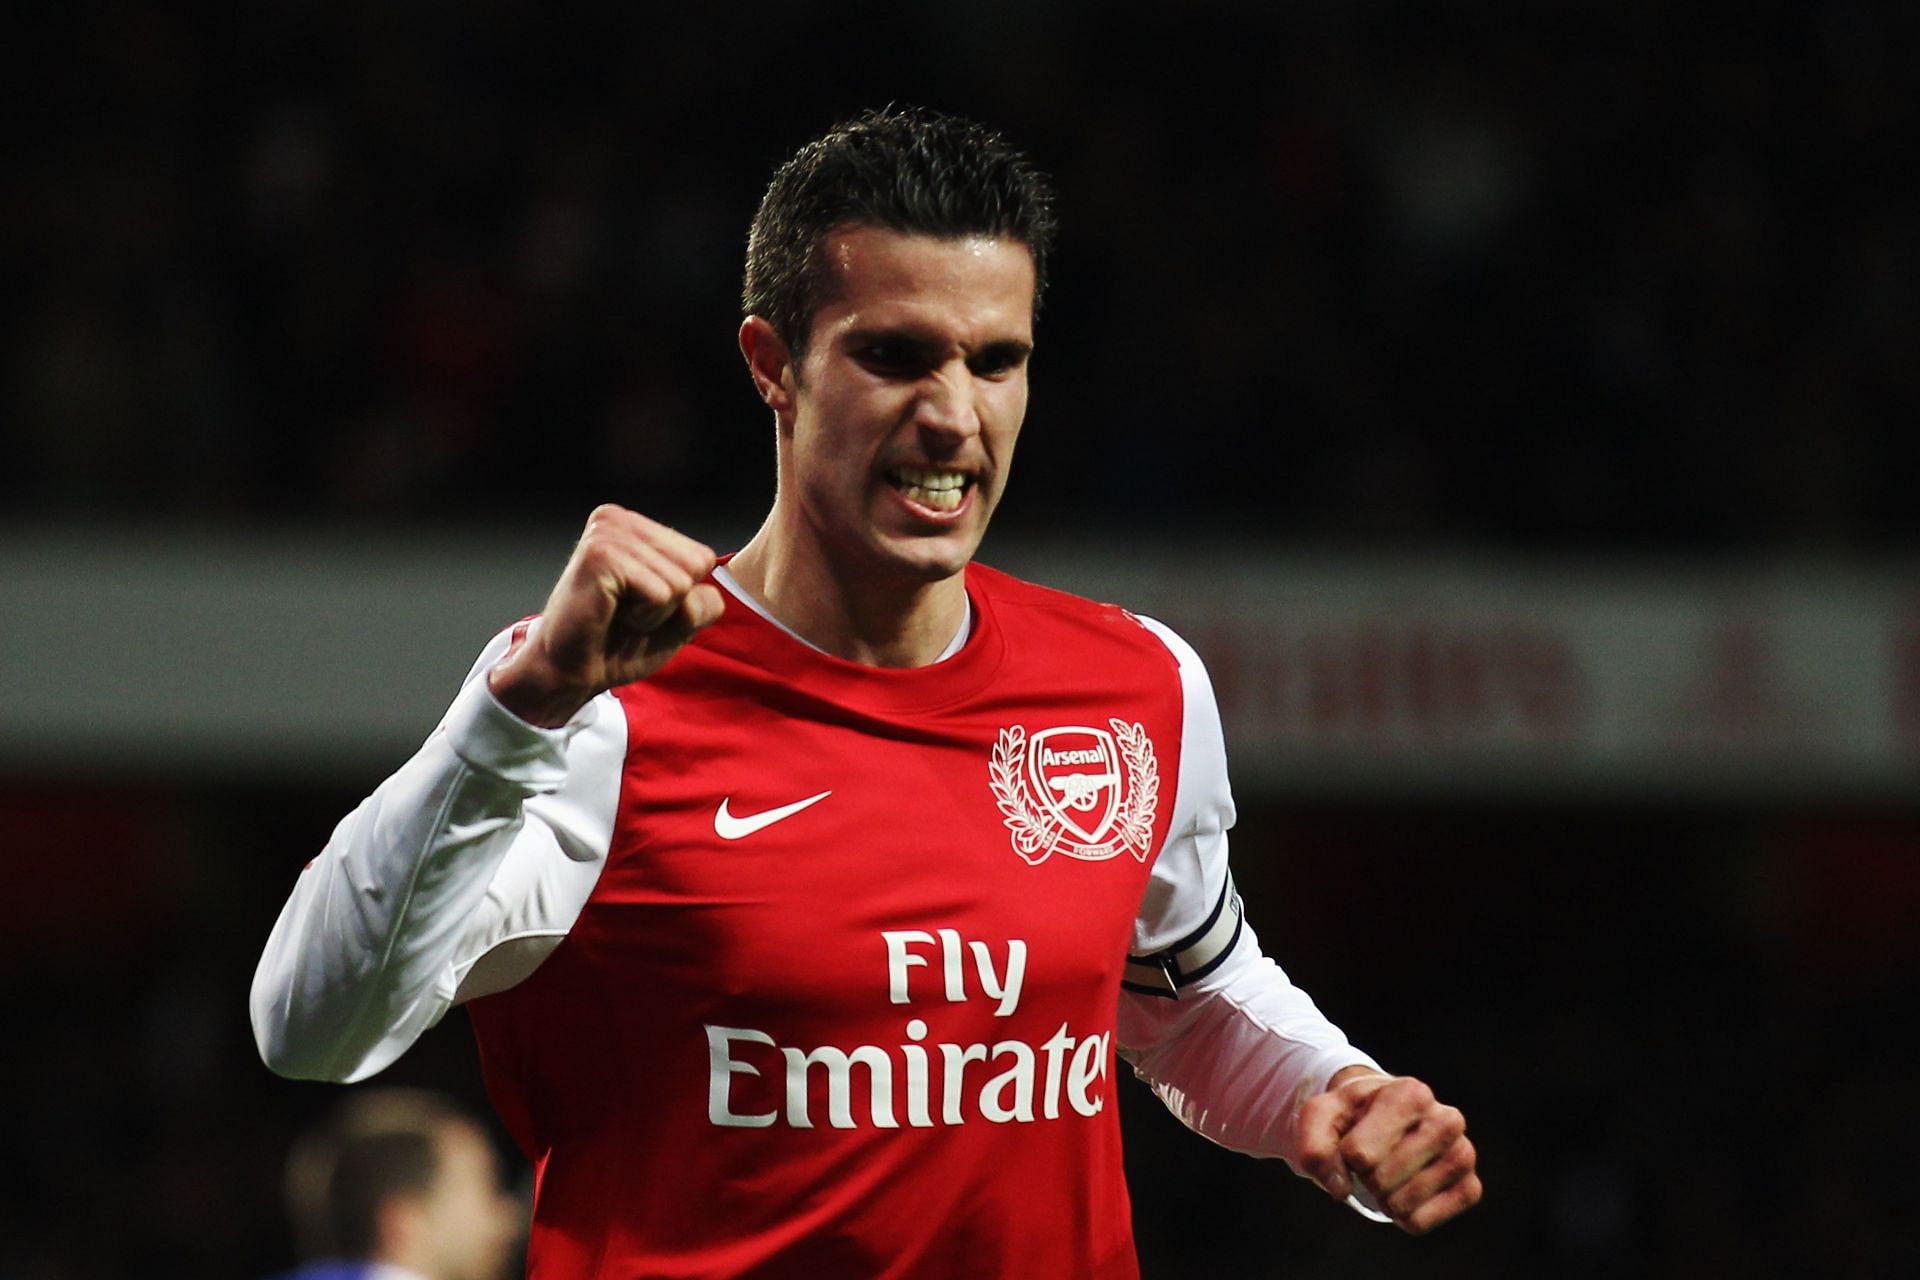 Robin van Persie was the best striker in the Premier League while at Arsenal.